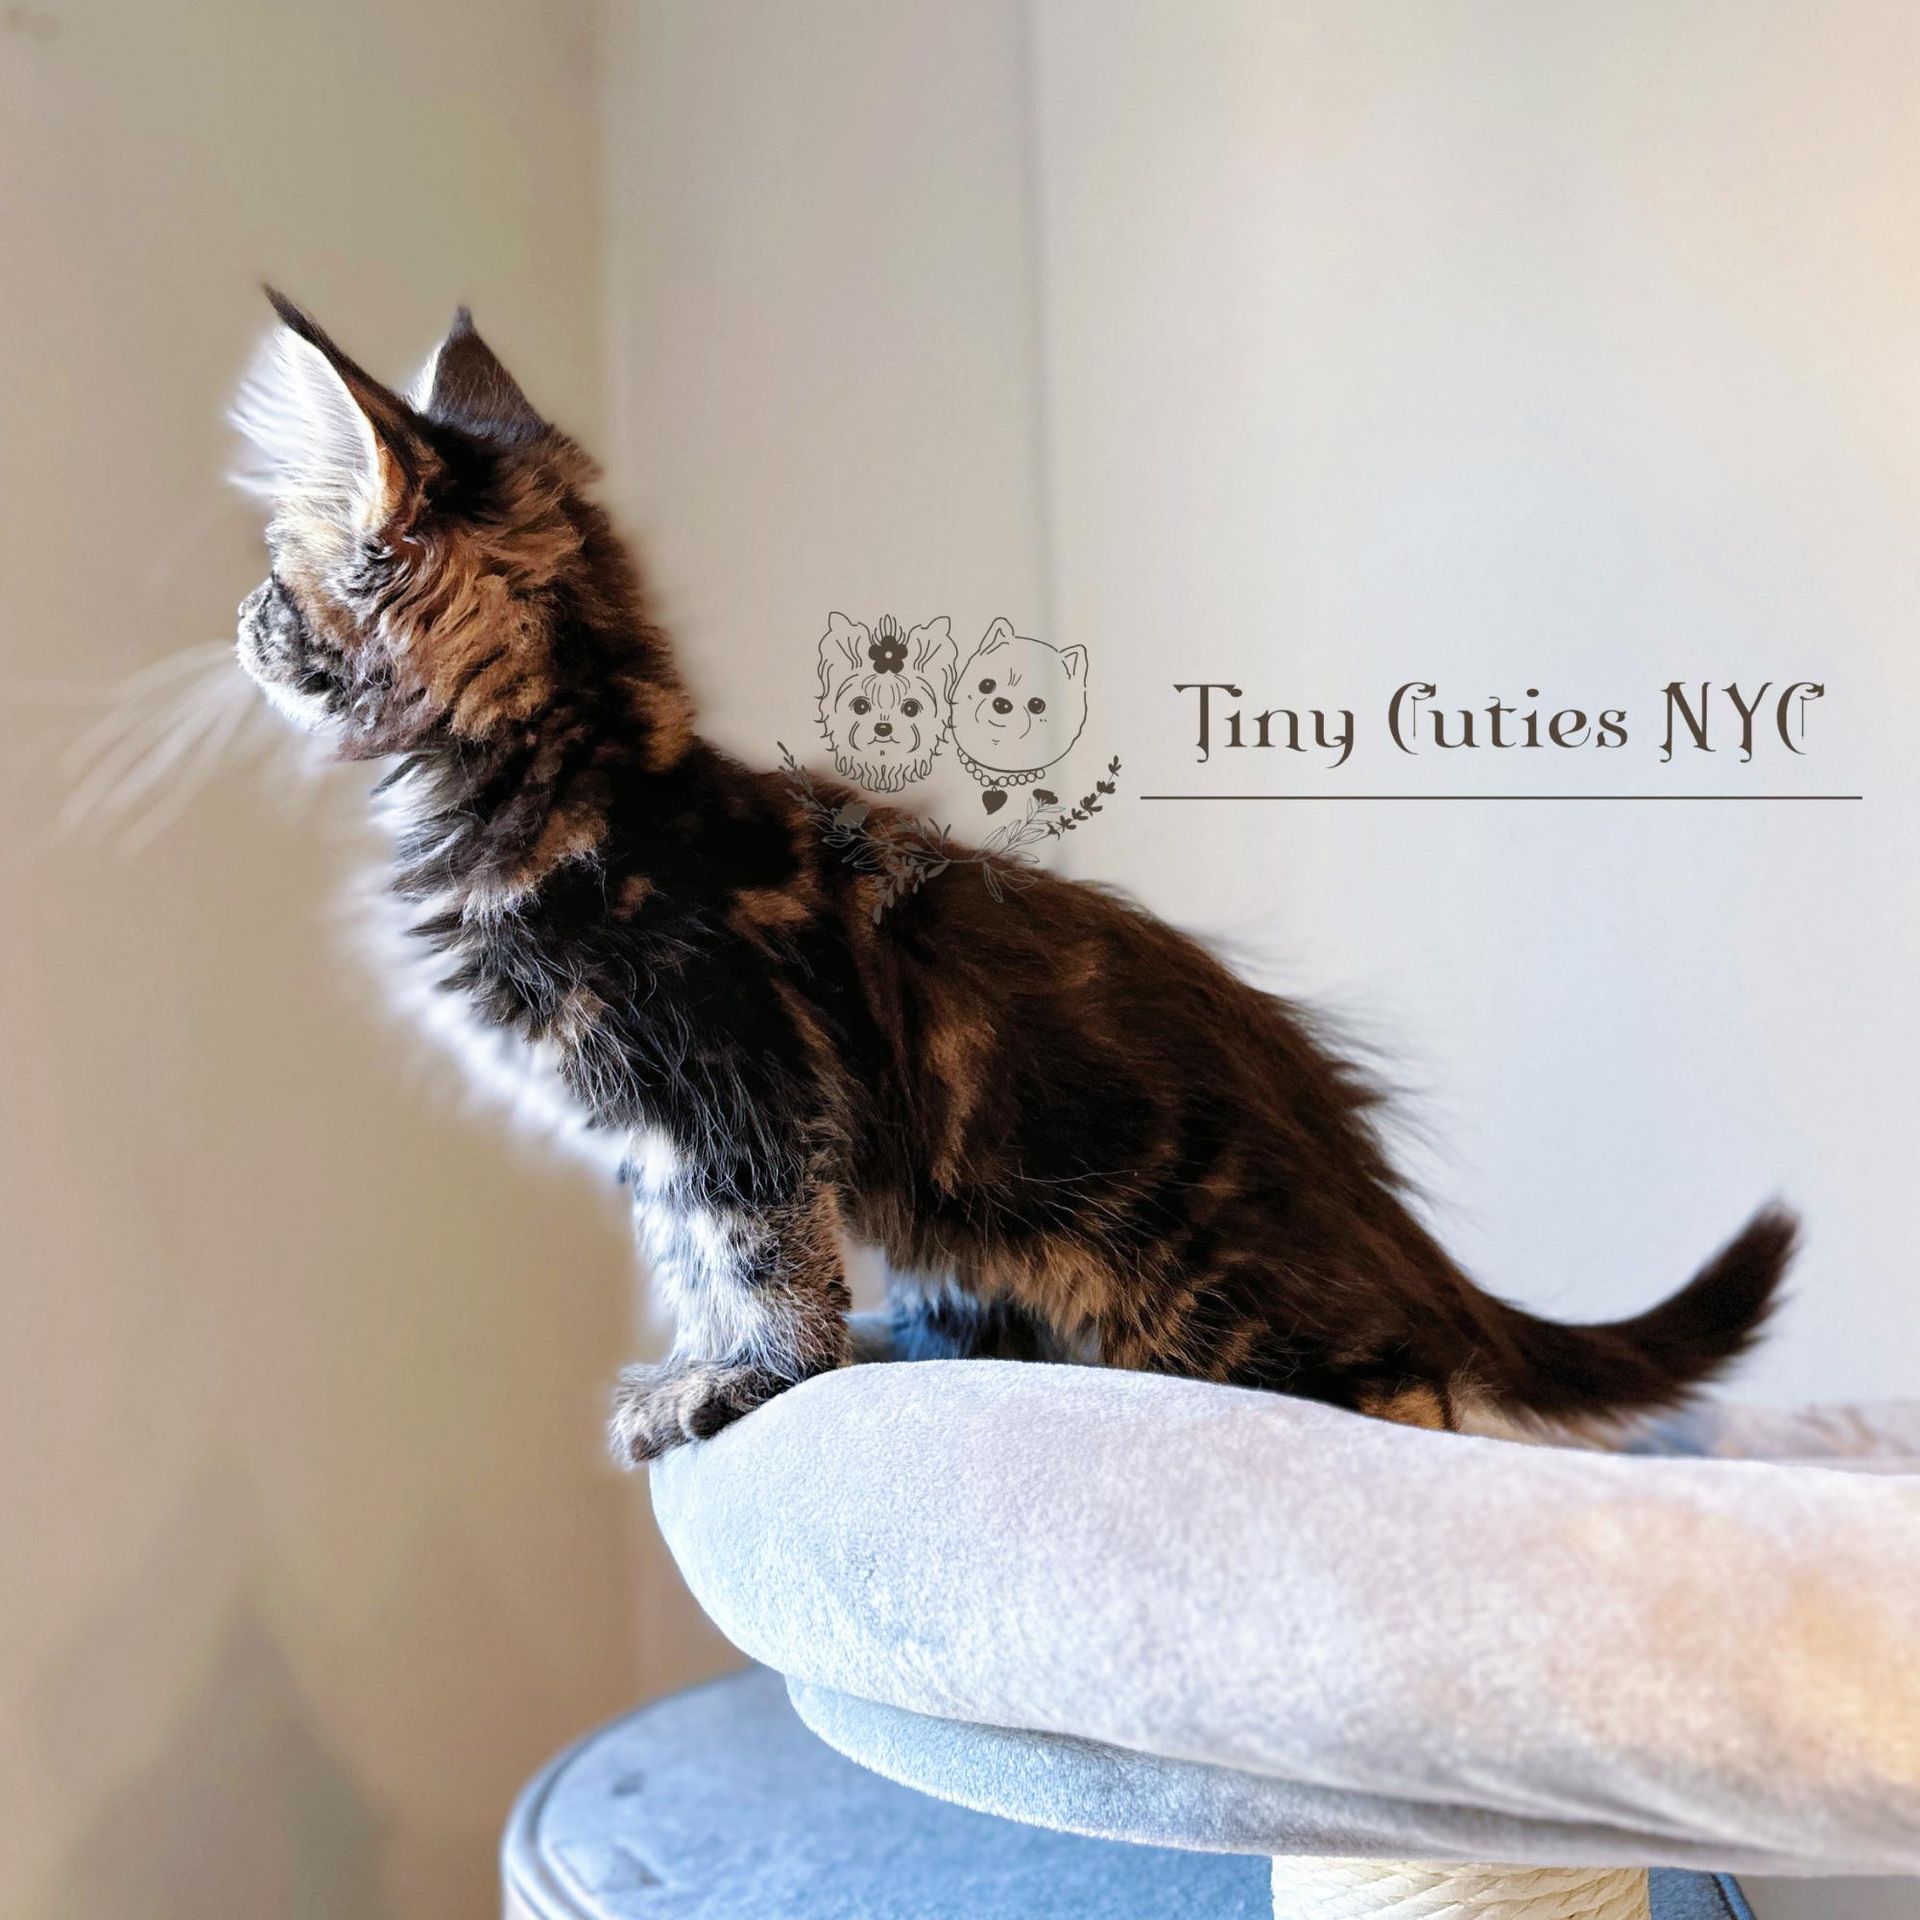 Maine Coon — Astoria Queens, NY — ﻿Tiny Cuties NYC